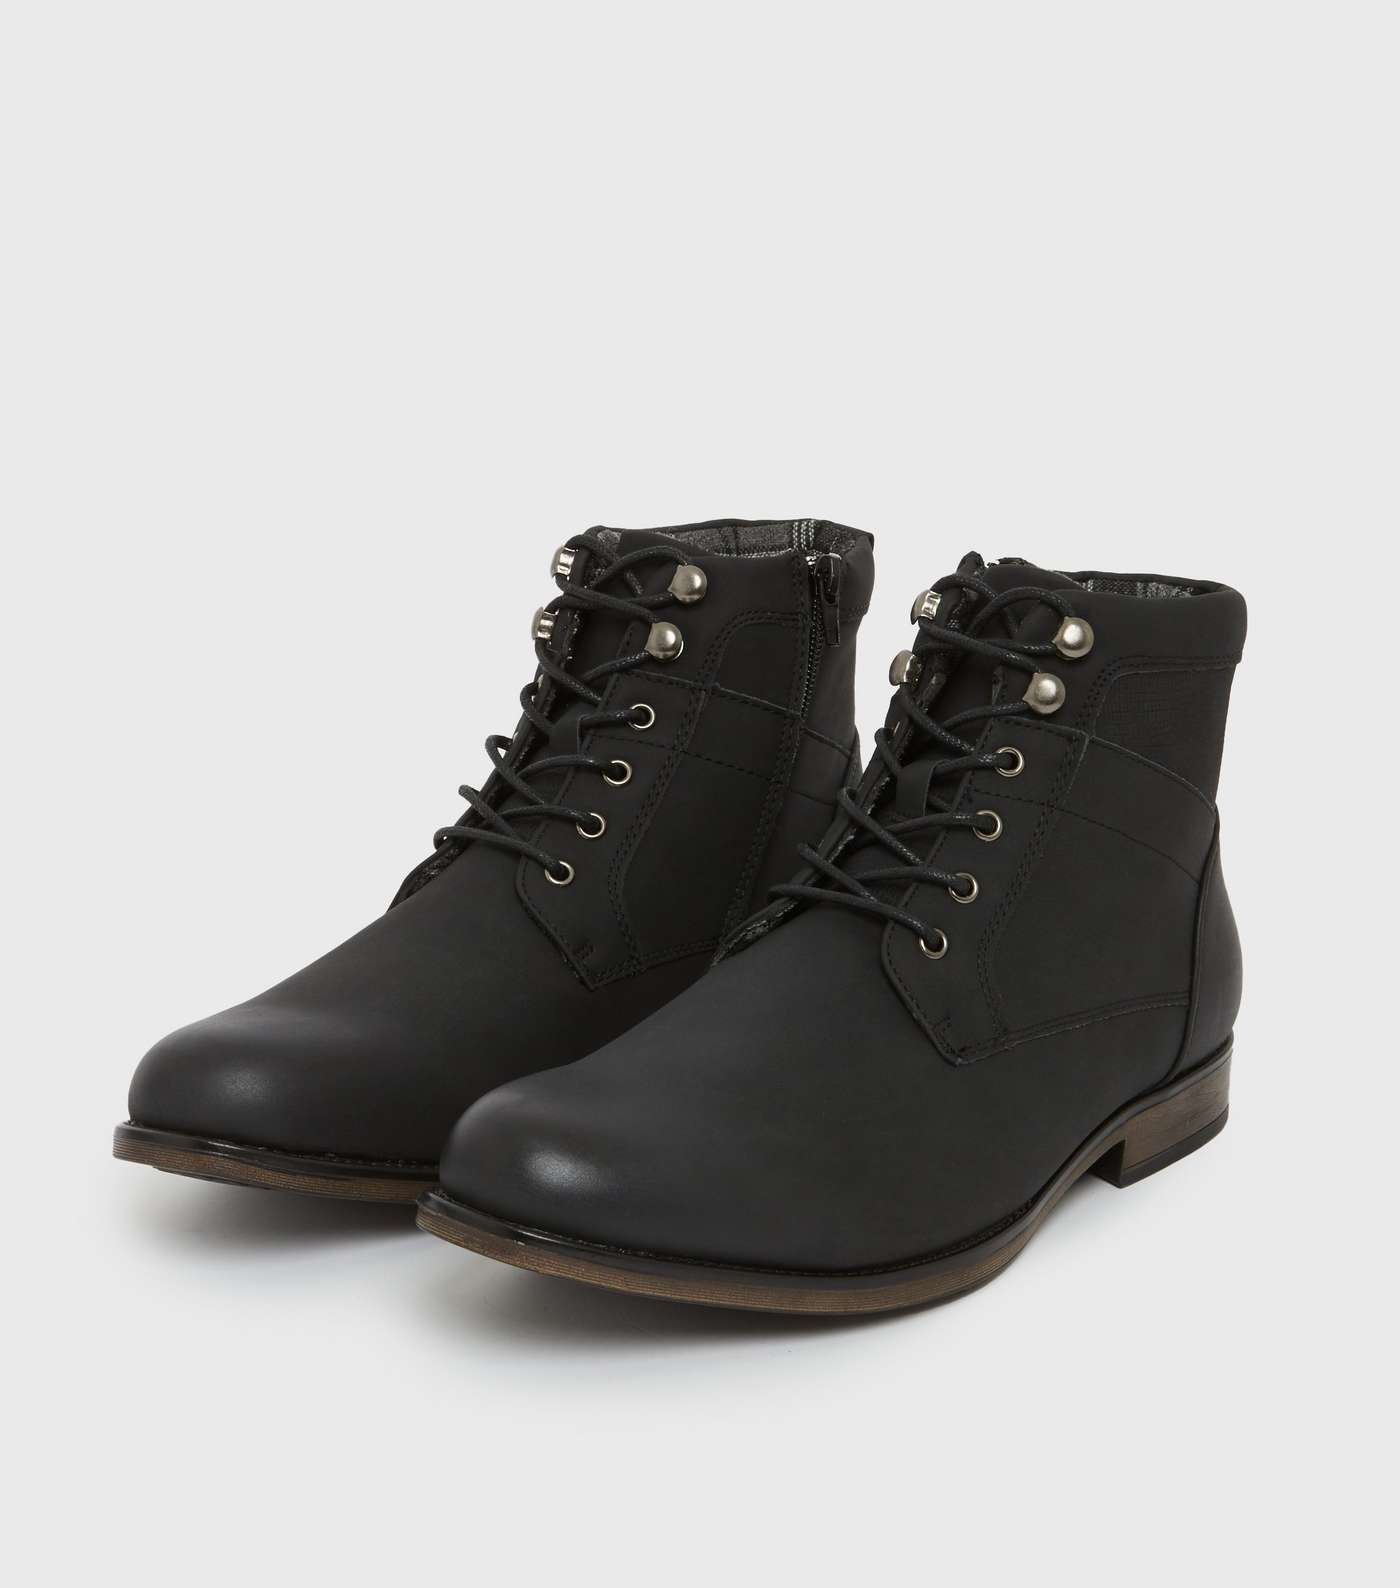 Black Lace Up Military Boots Image 2